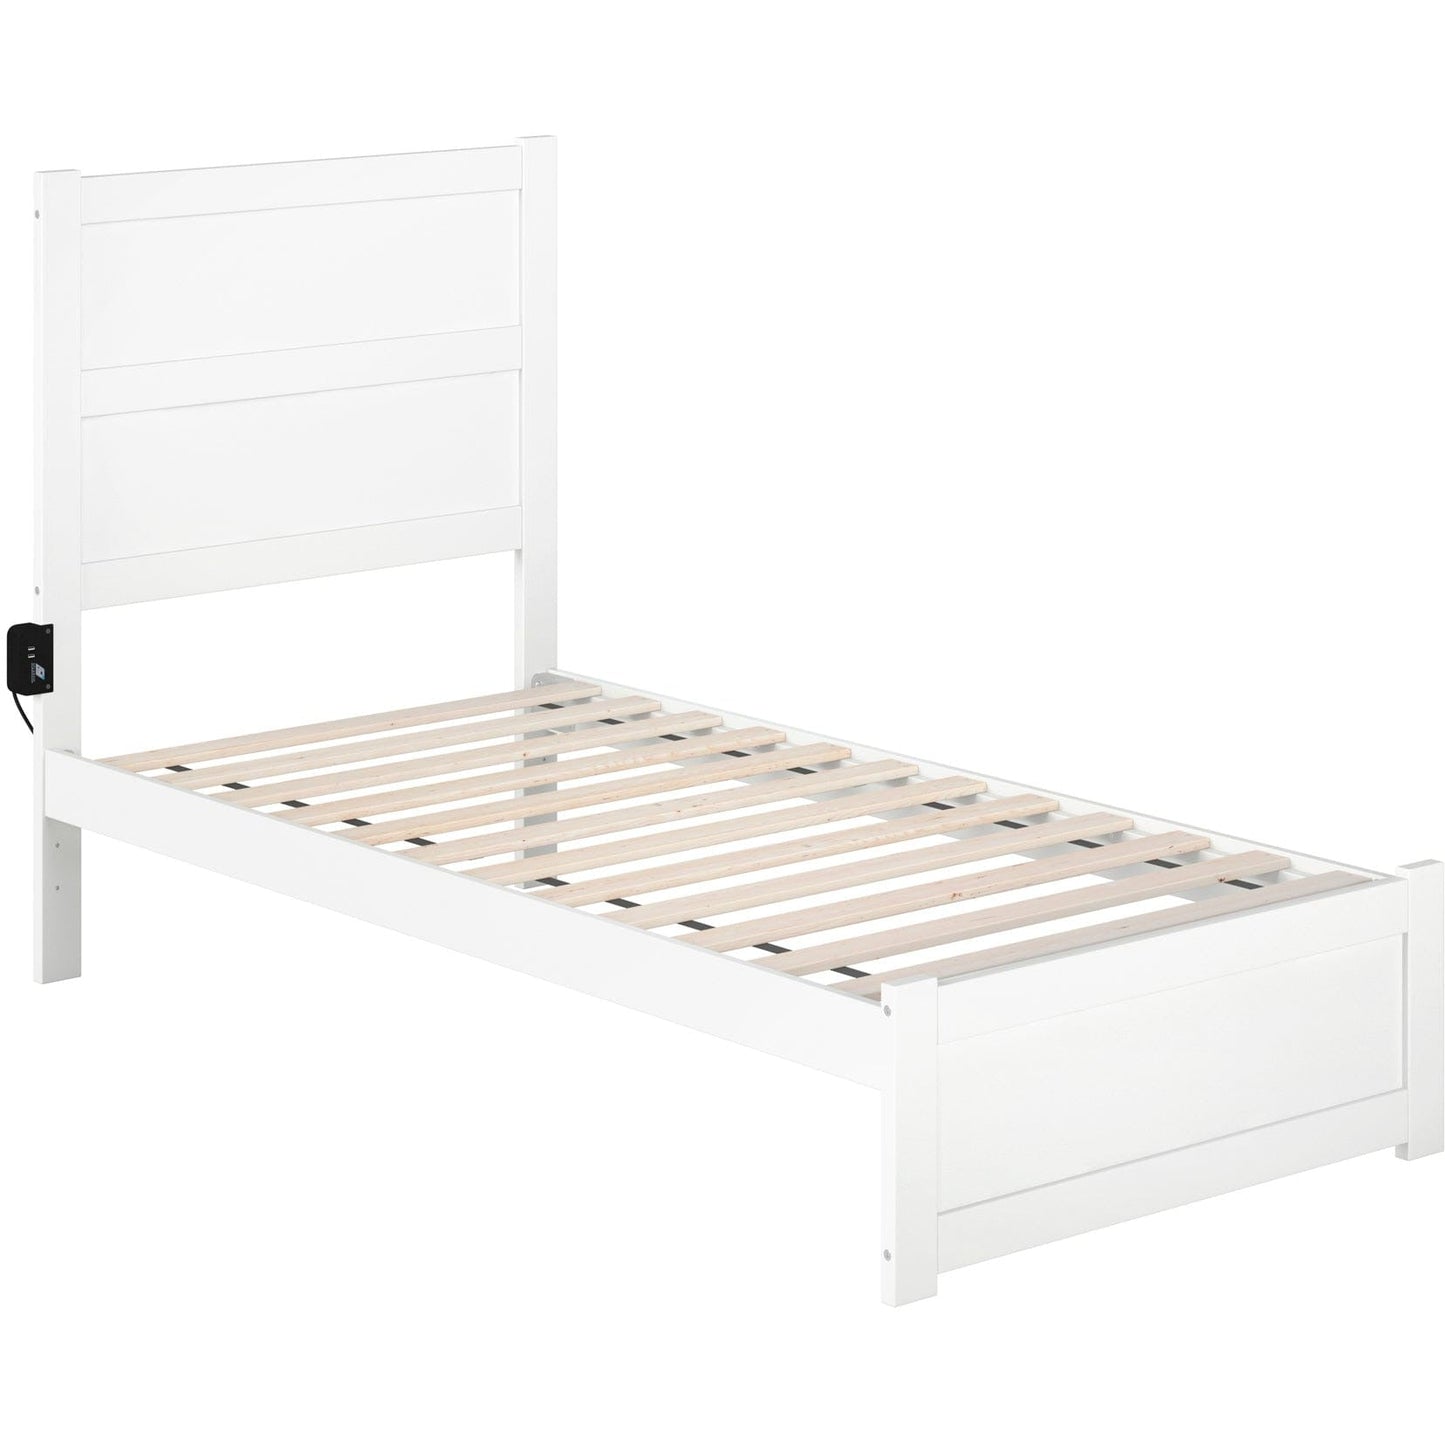 AFI Furnishings NoHo Twin Bed with Footboard in White AG9160022